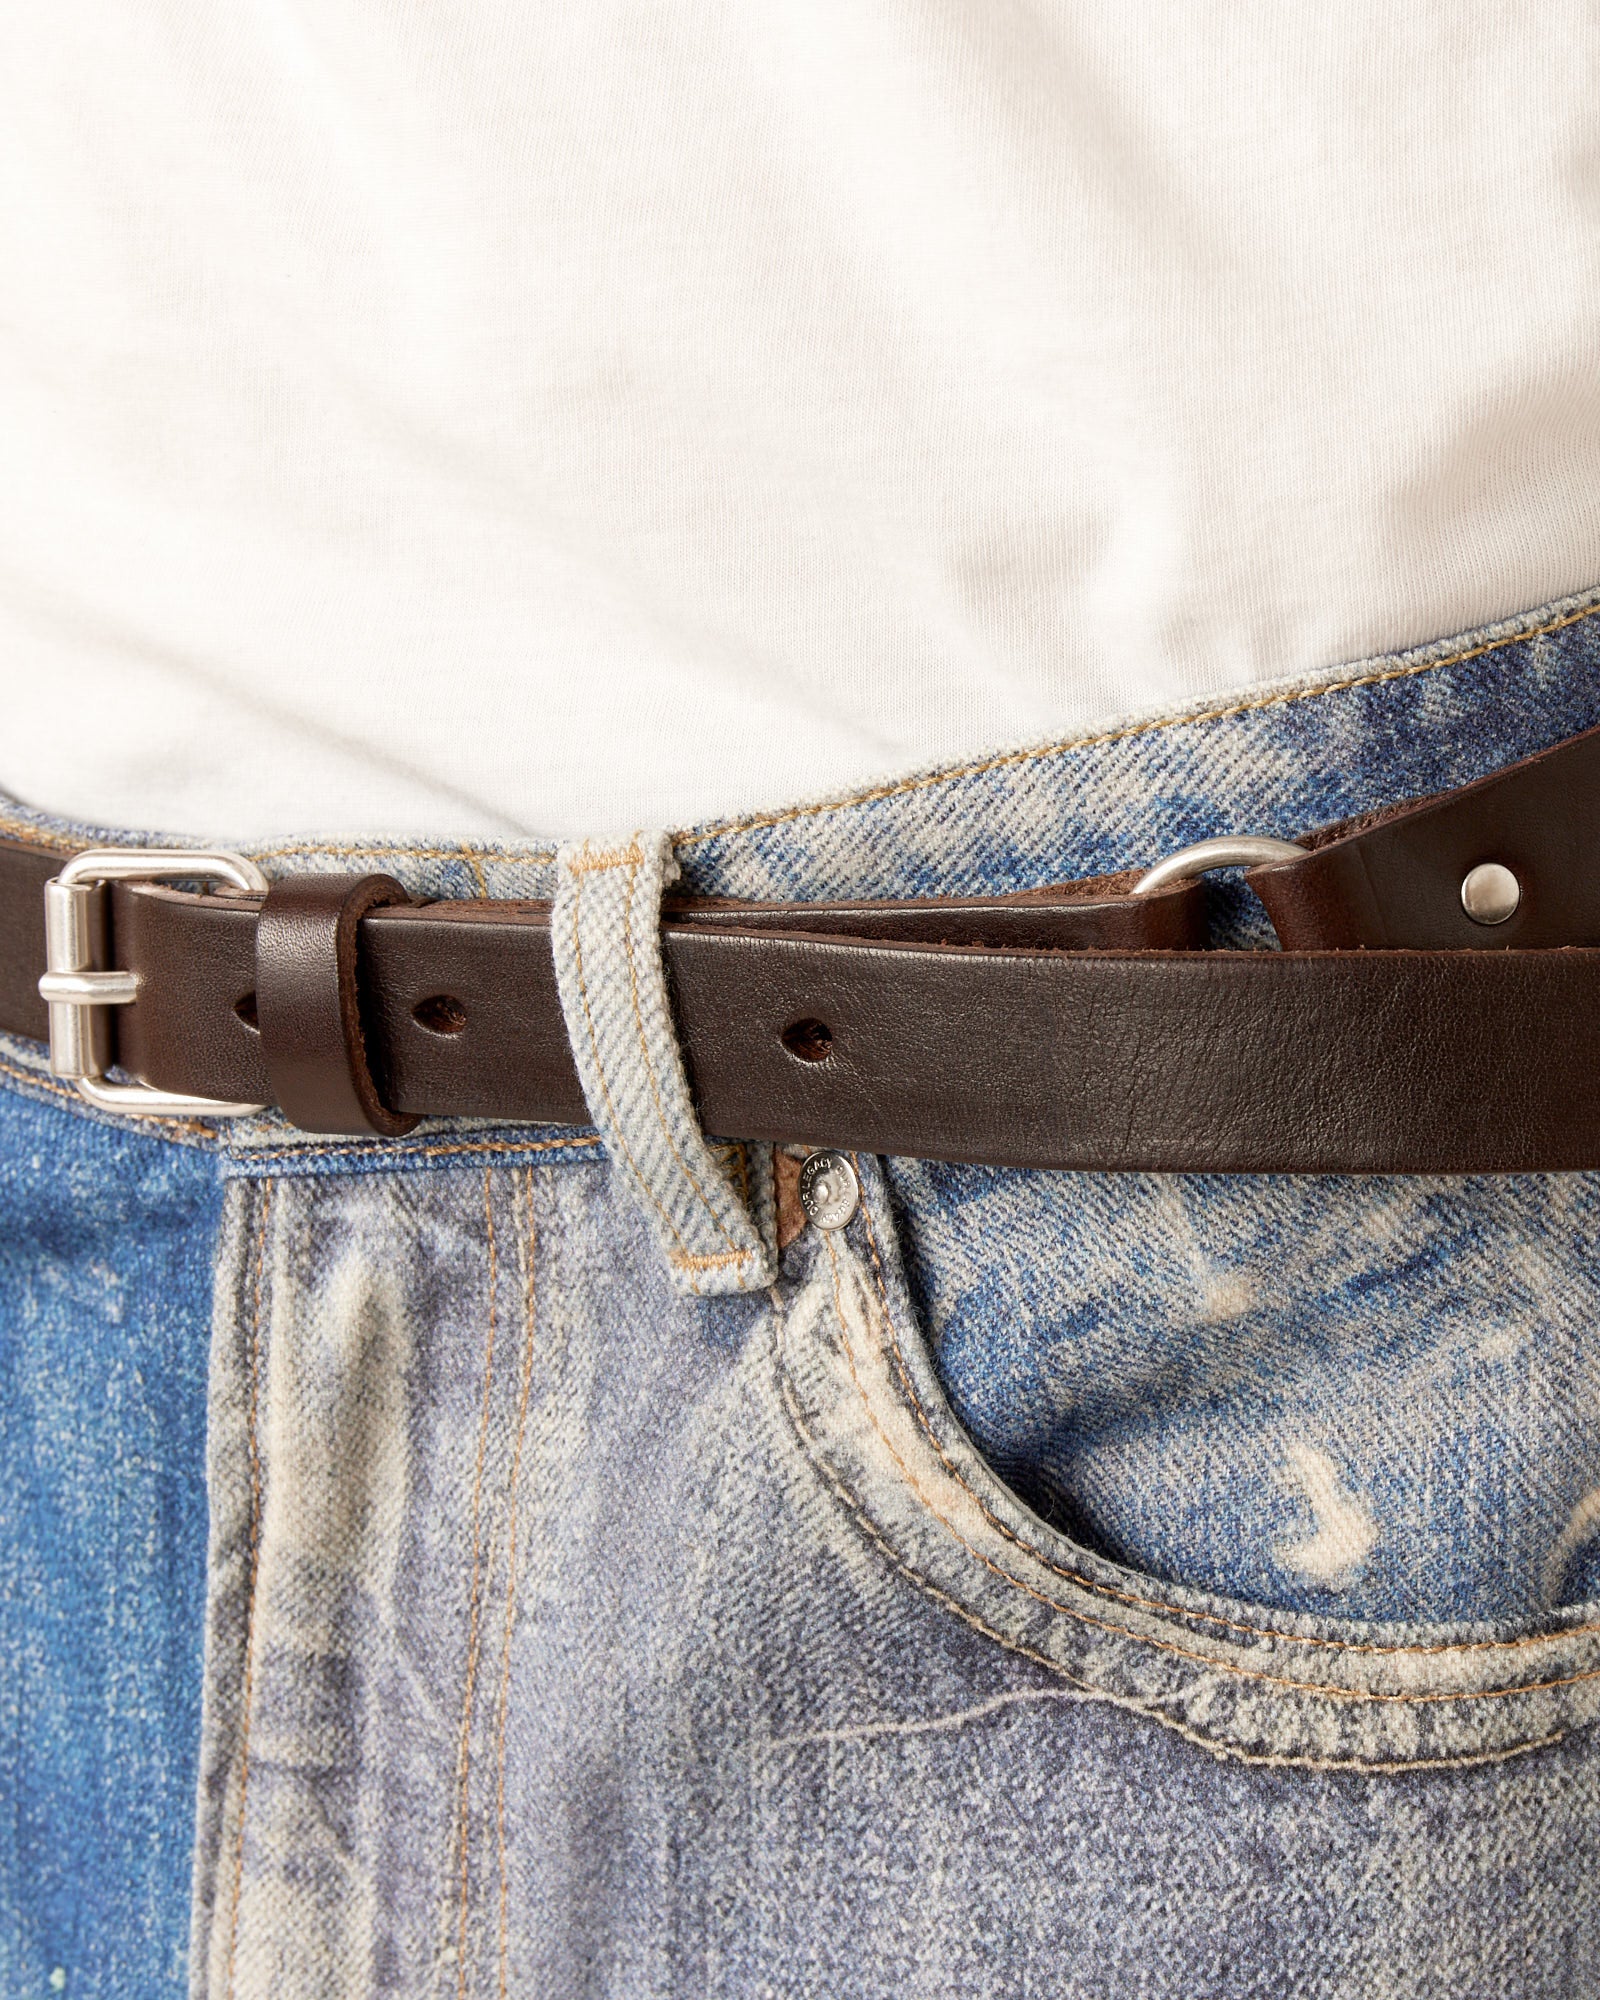 Ring Belt in Grizzly Brown